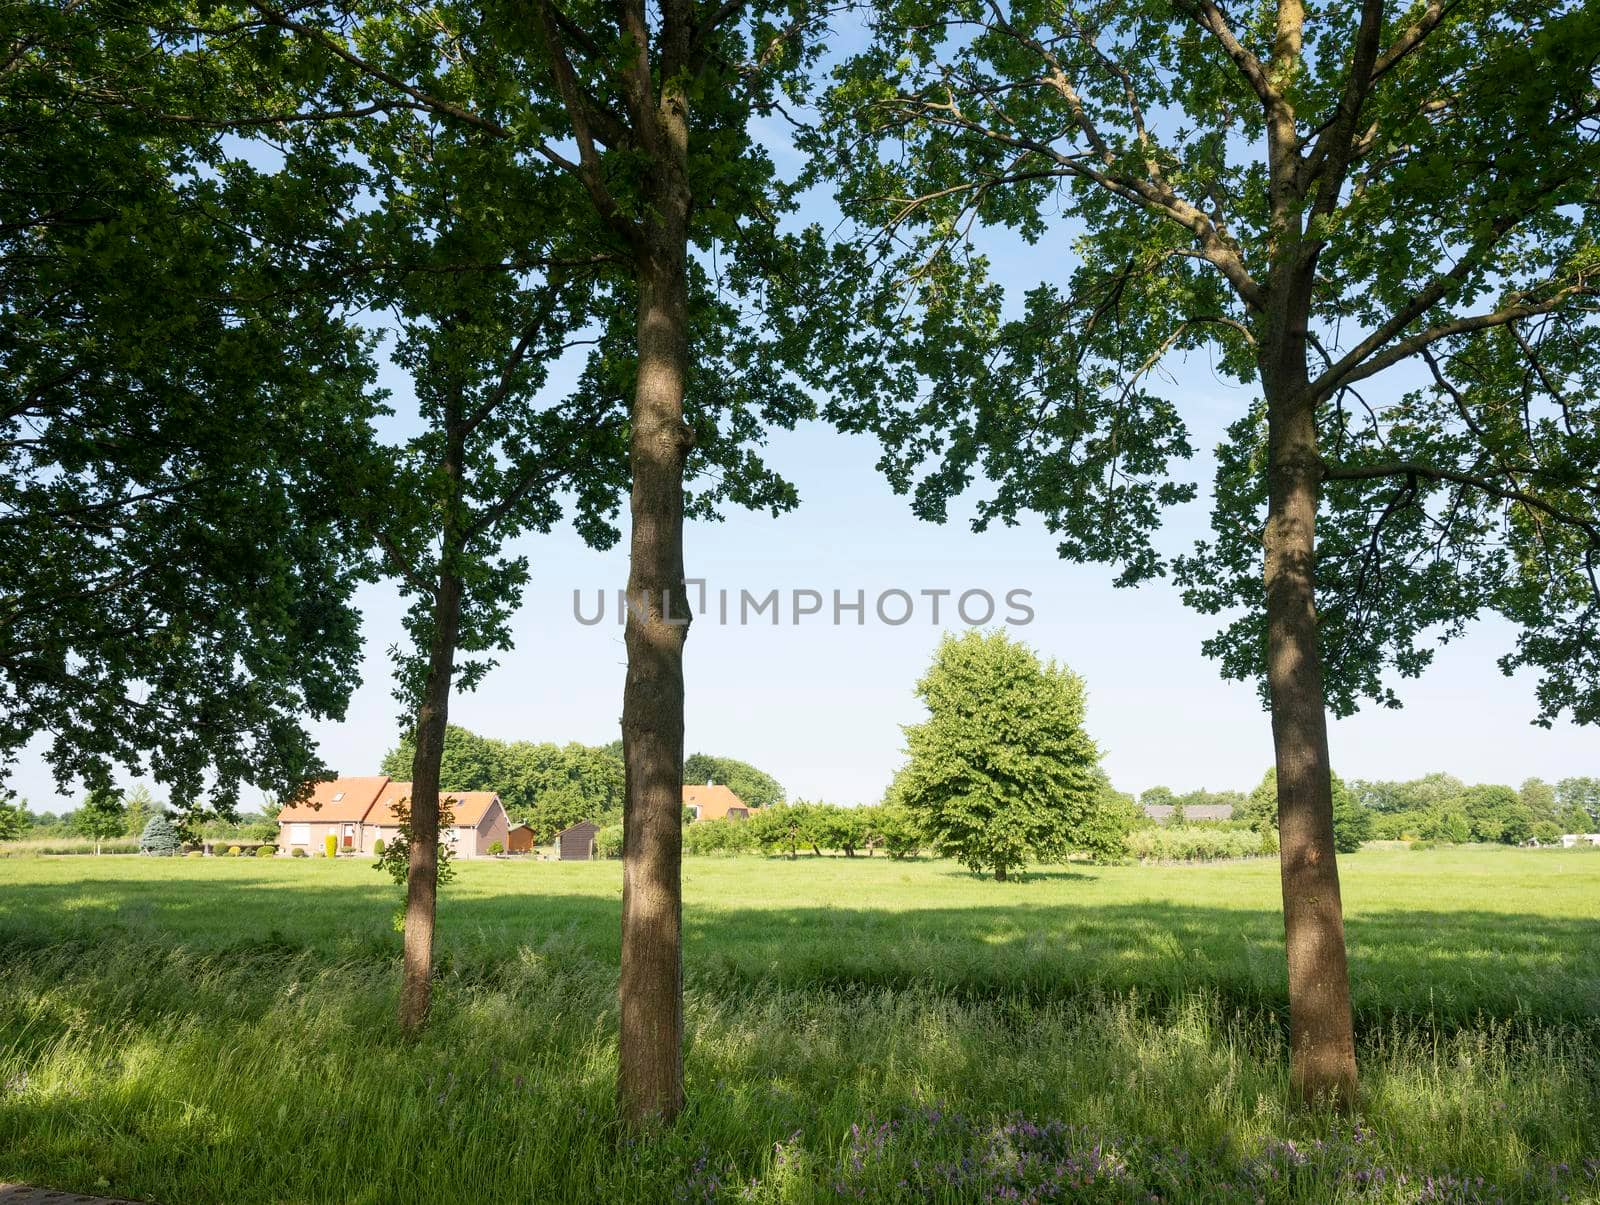 green grassy fields with houses and trees between arnhem and nijmegen in the netherlands under blue sky in summer